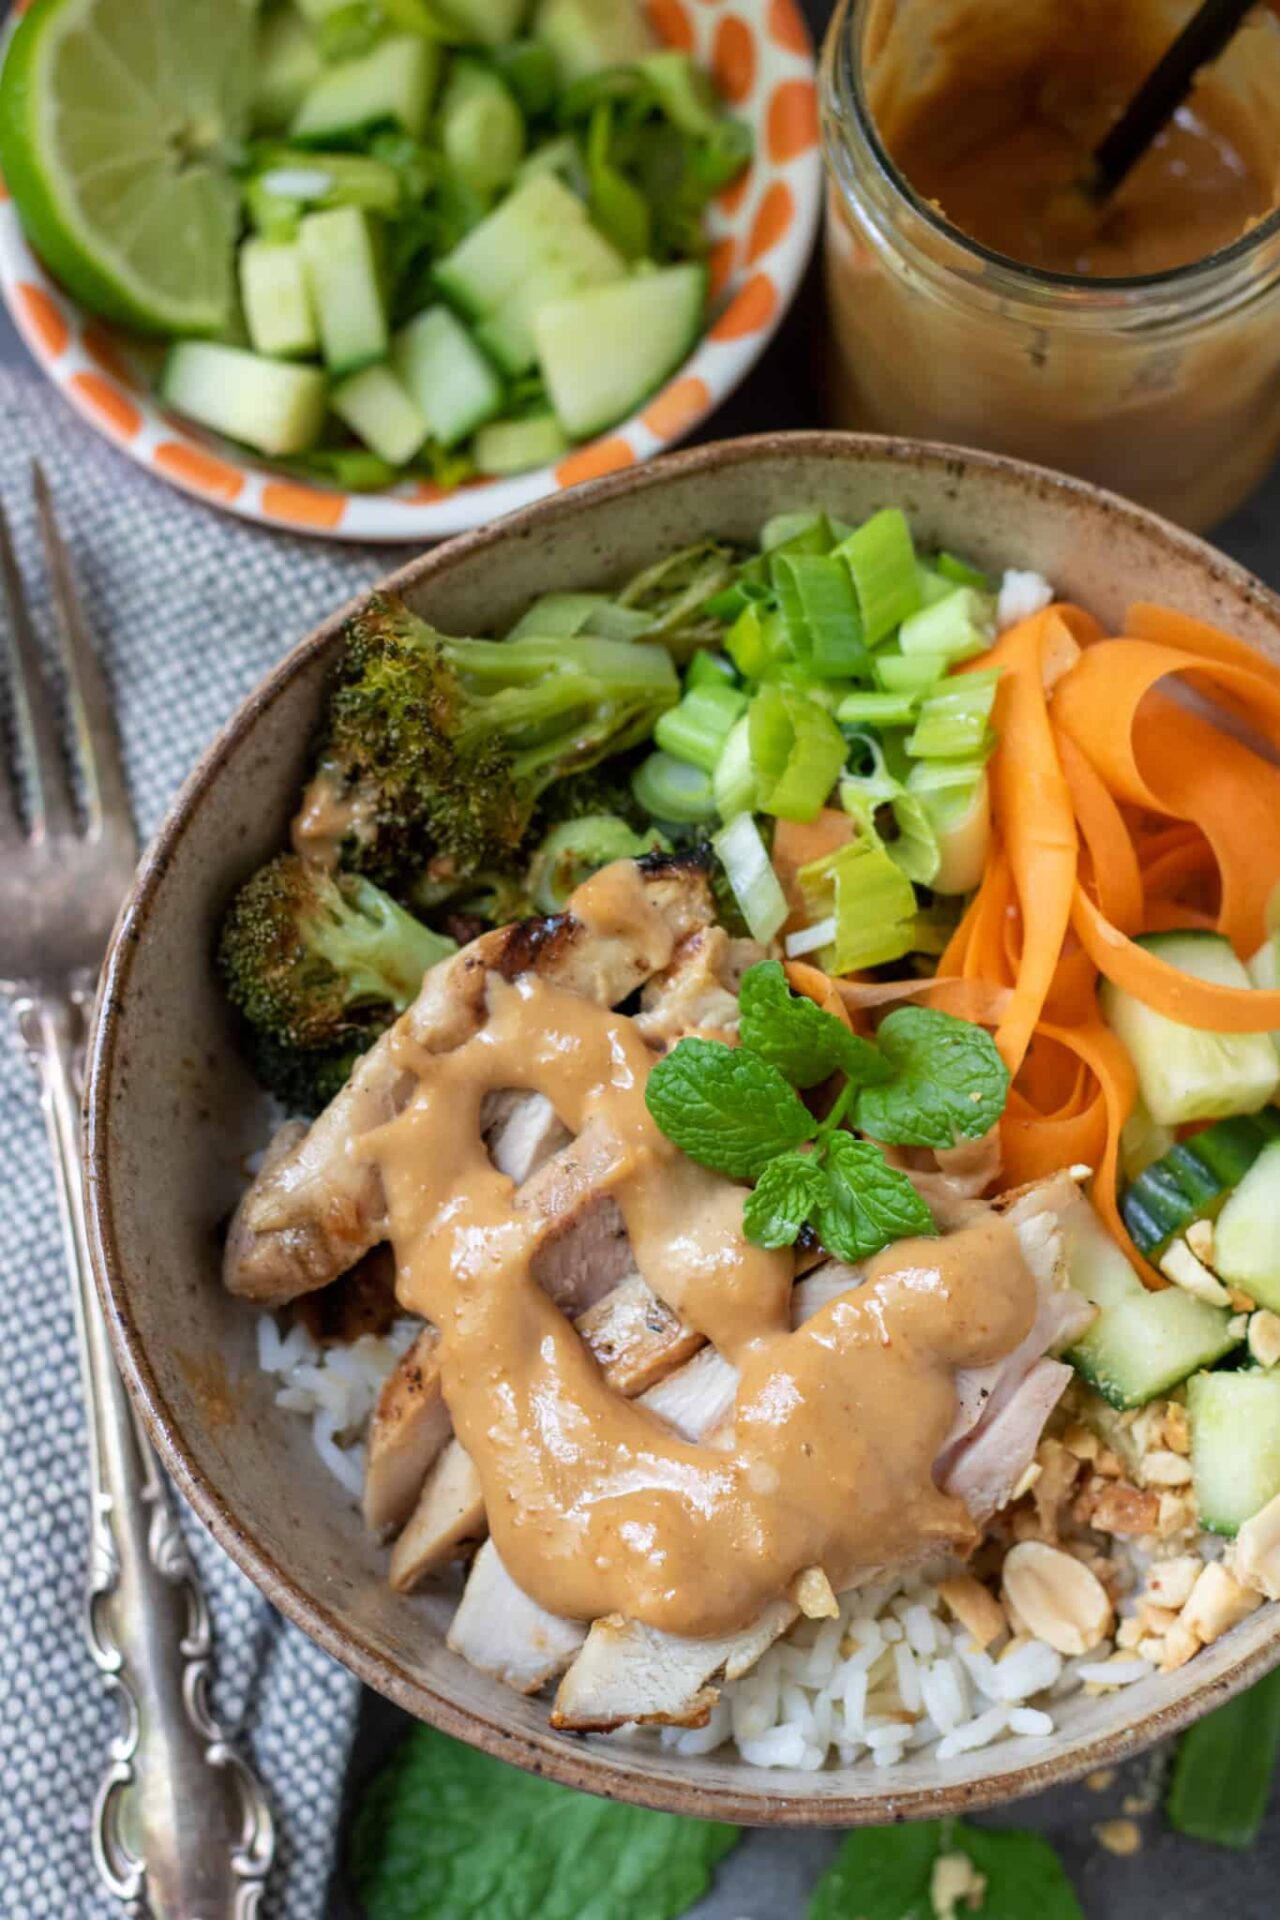 A bowl filled with rice, roasted broccoli, carrots and diced cucumber. There's sliced grilled chicken and a peanut sauce drizzled on top. There's a fork next to the bowl and a small bowl filled with diced cucumber in the background.